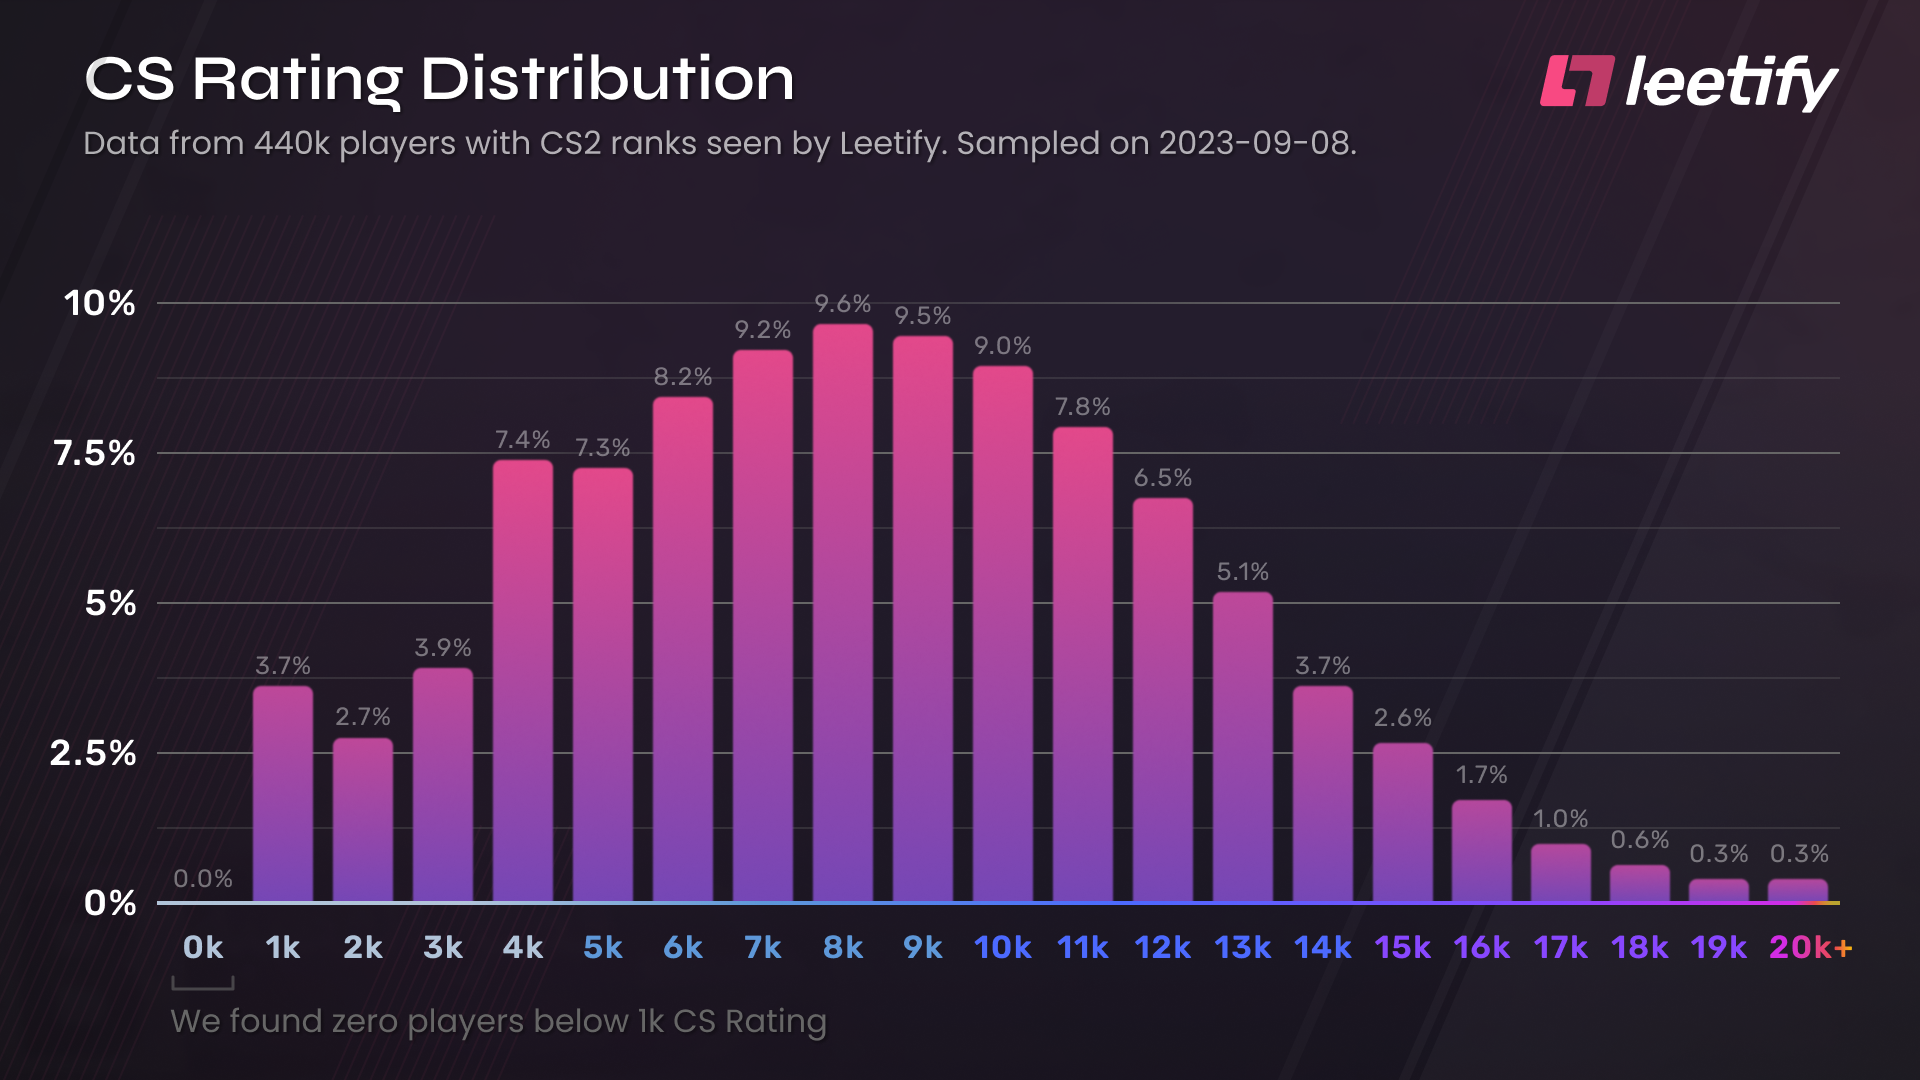 CS2 Ranking System: Rating distribution and how it compares to CS:GO